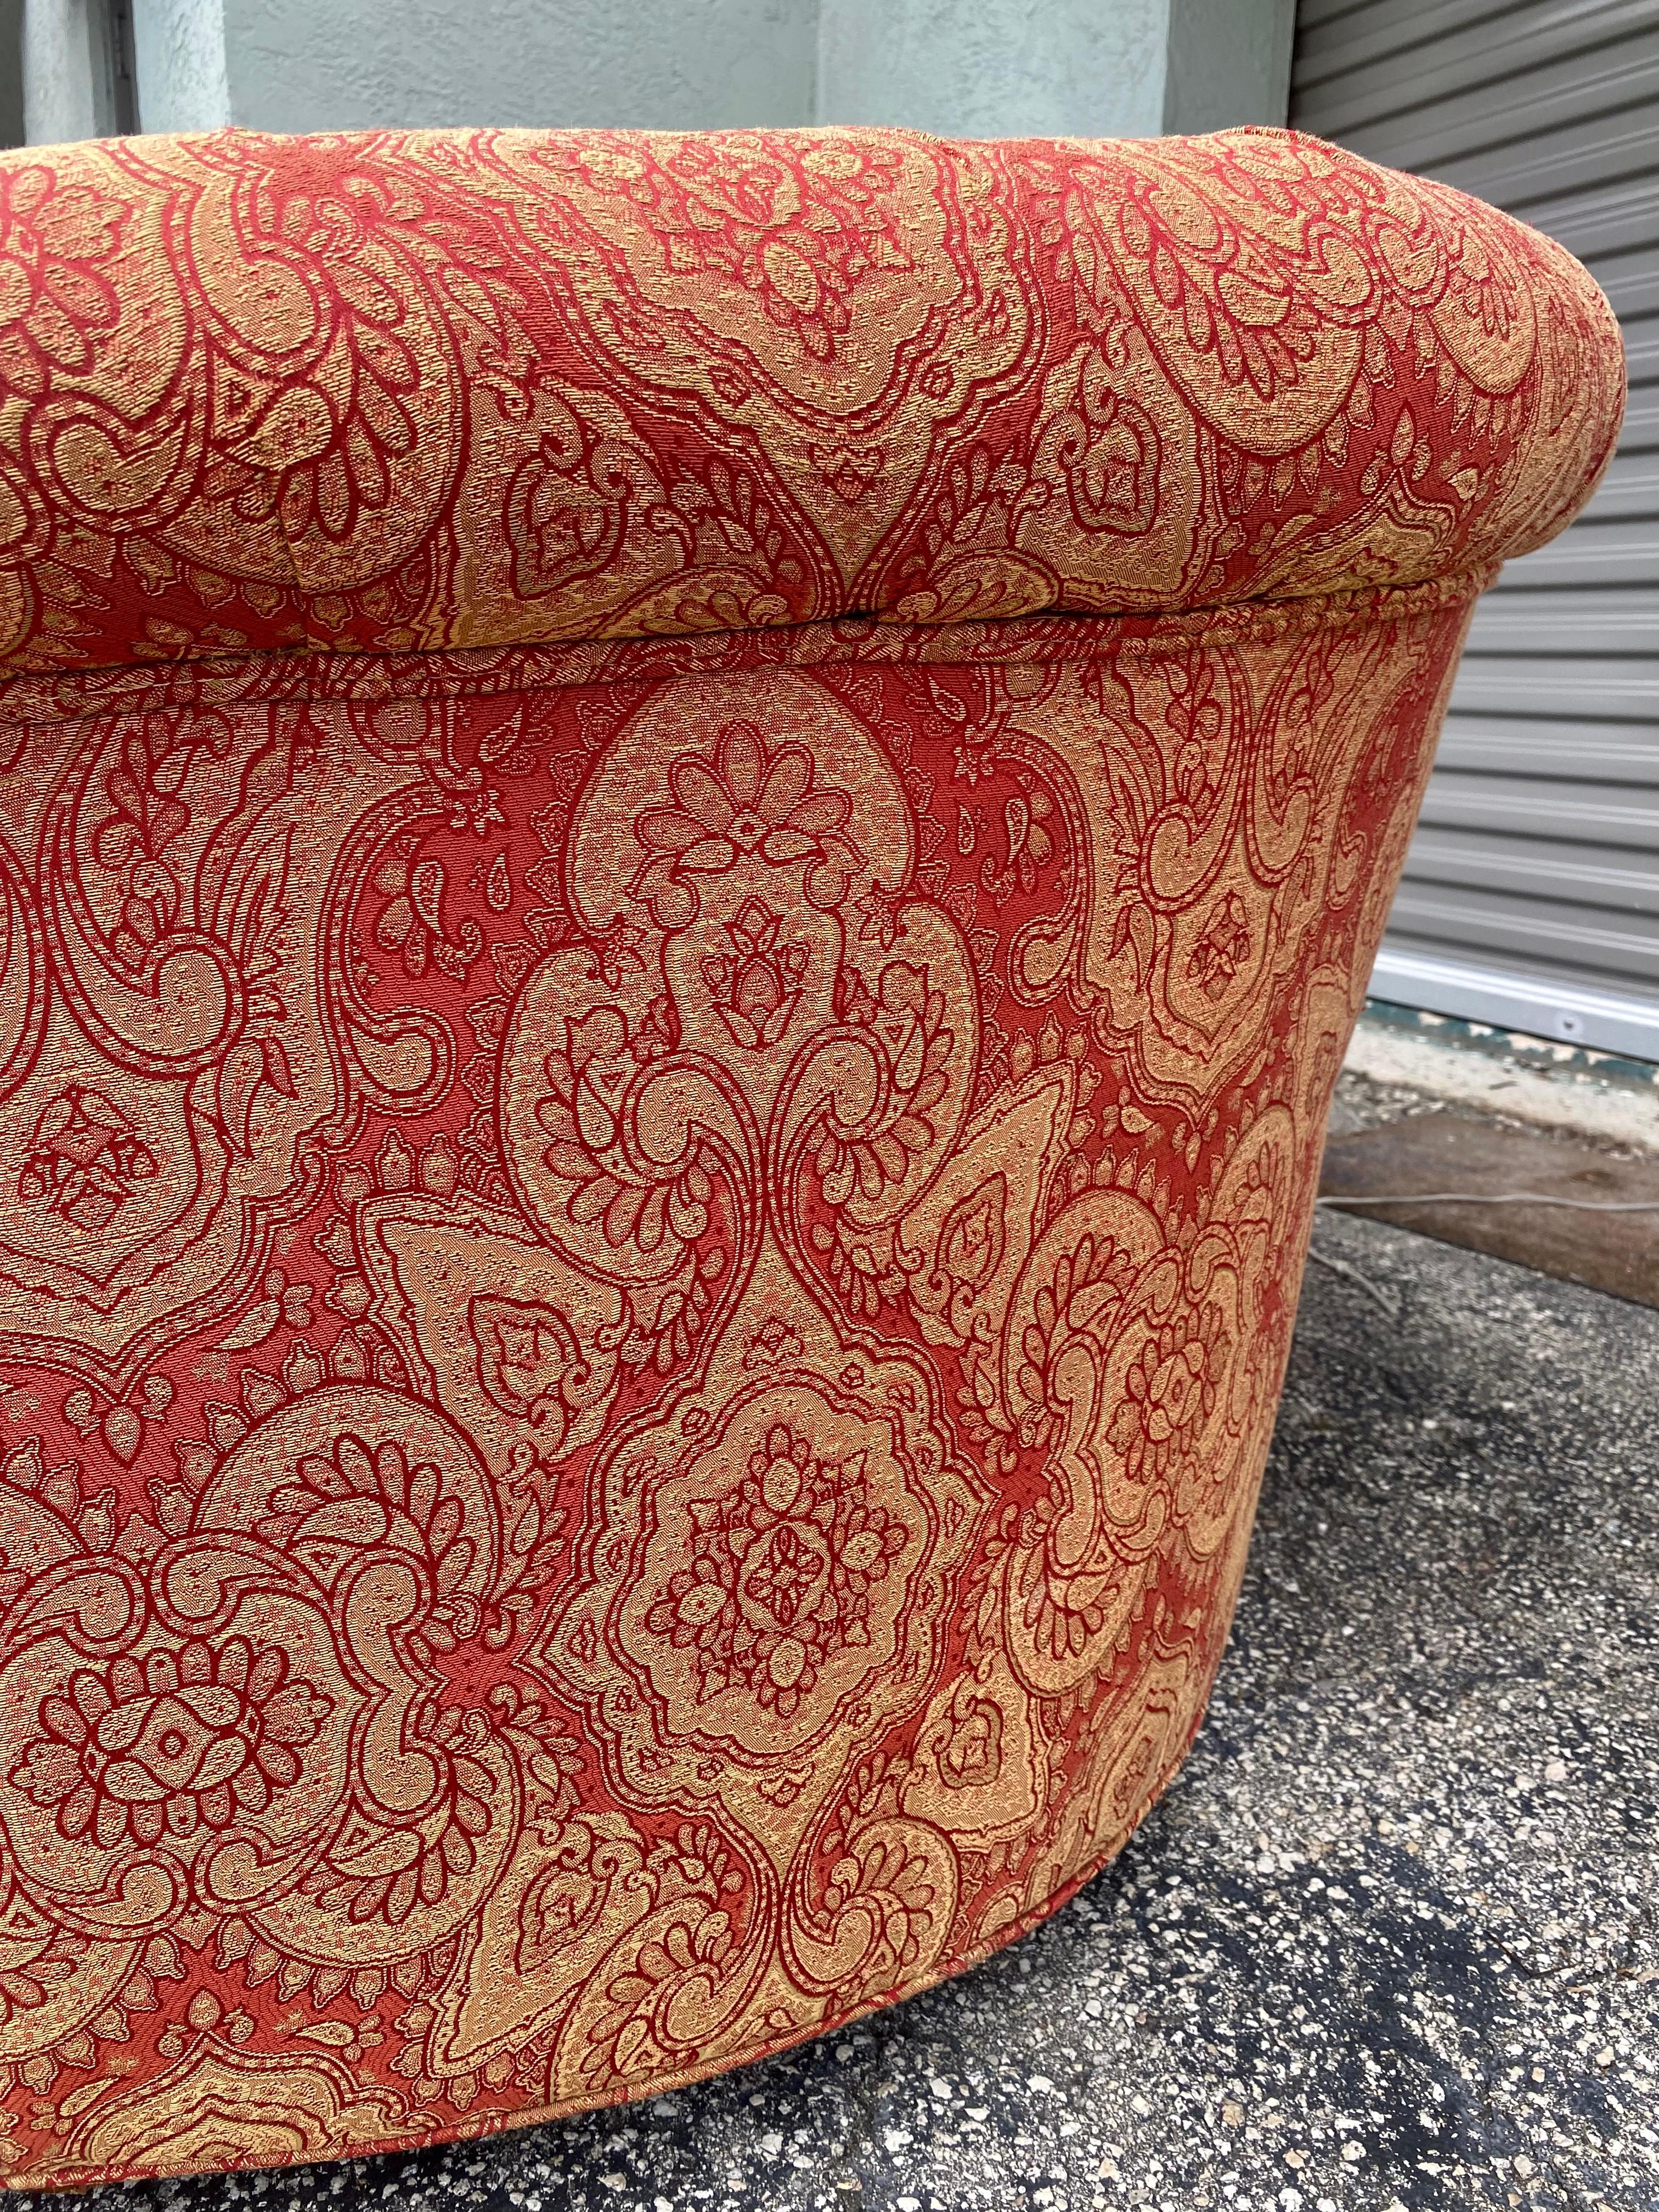 1960s Mid Century Curved Tufted Paisley Chesterfield Kidney Sofa For Sale 2